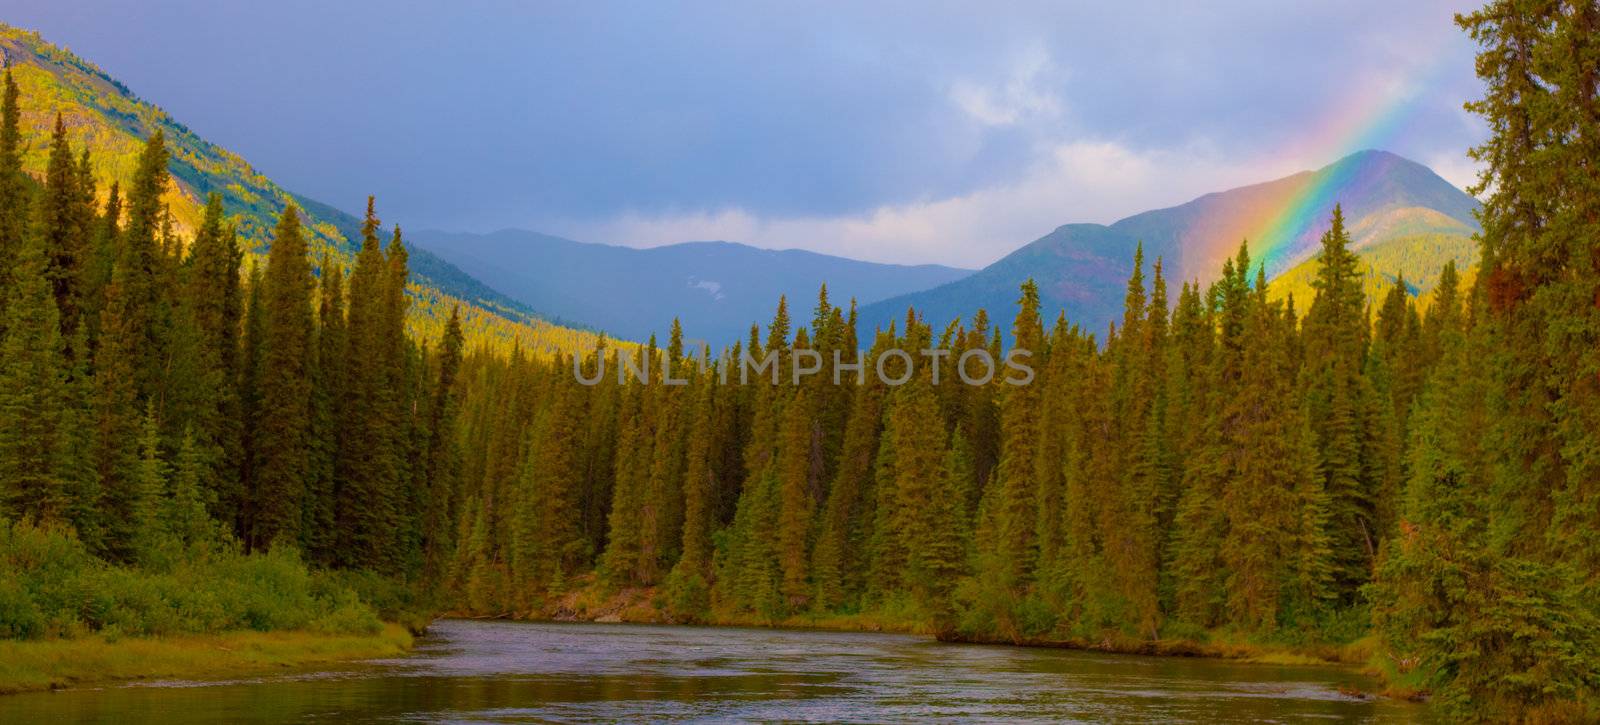 Rainbow at Big Salmon River by PiLens